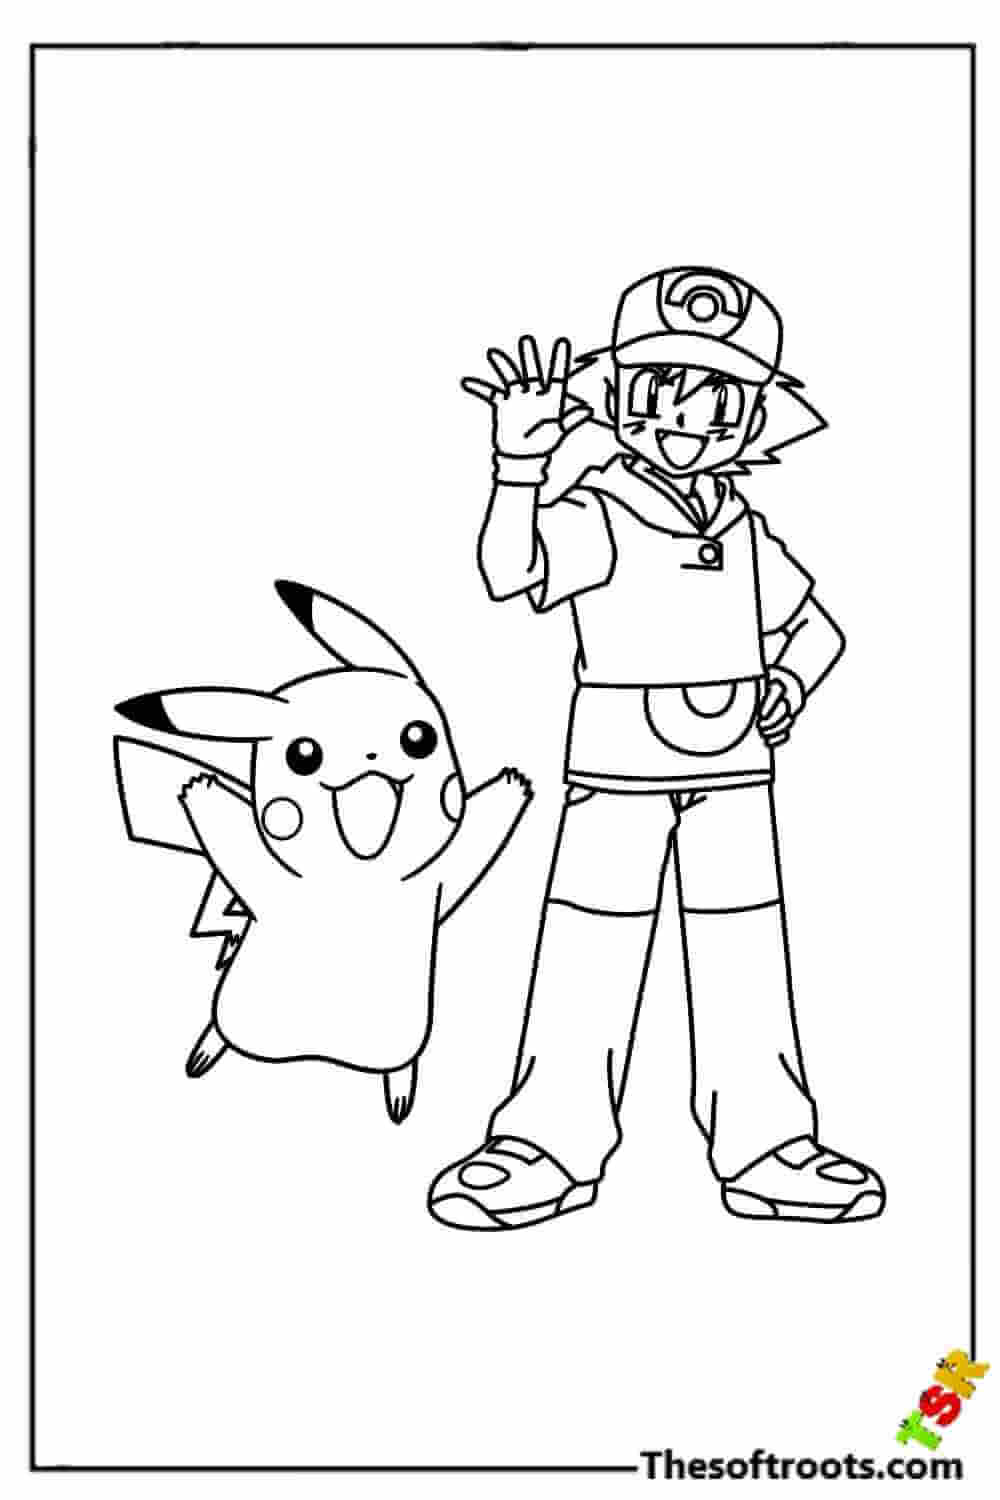 Pikachu and friend enjoying coloring pages